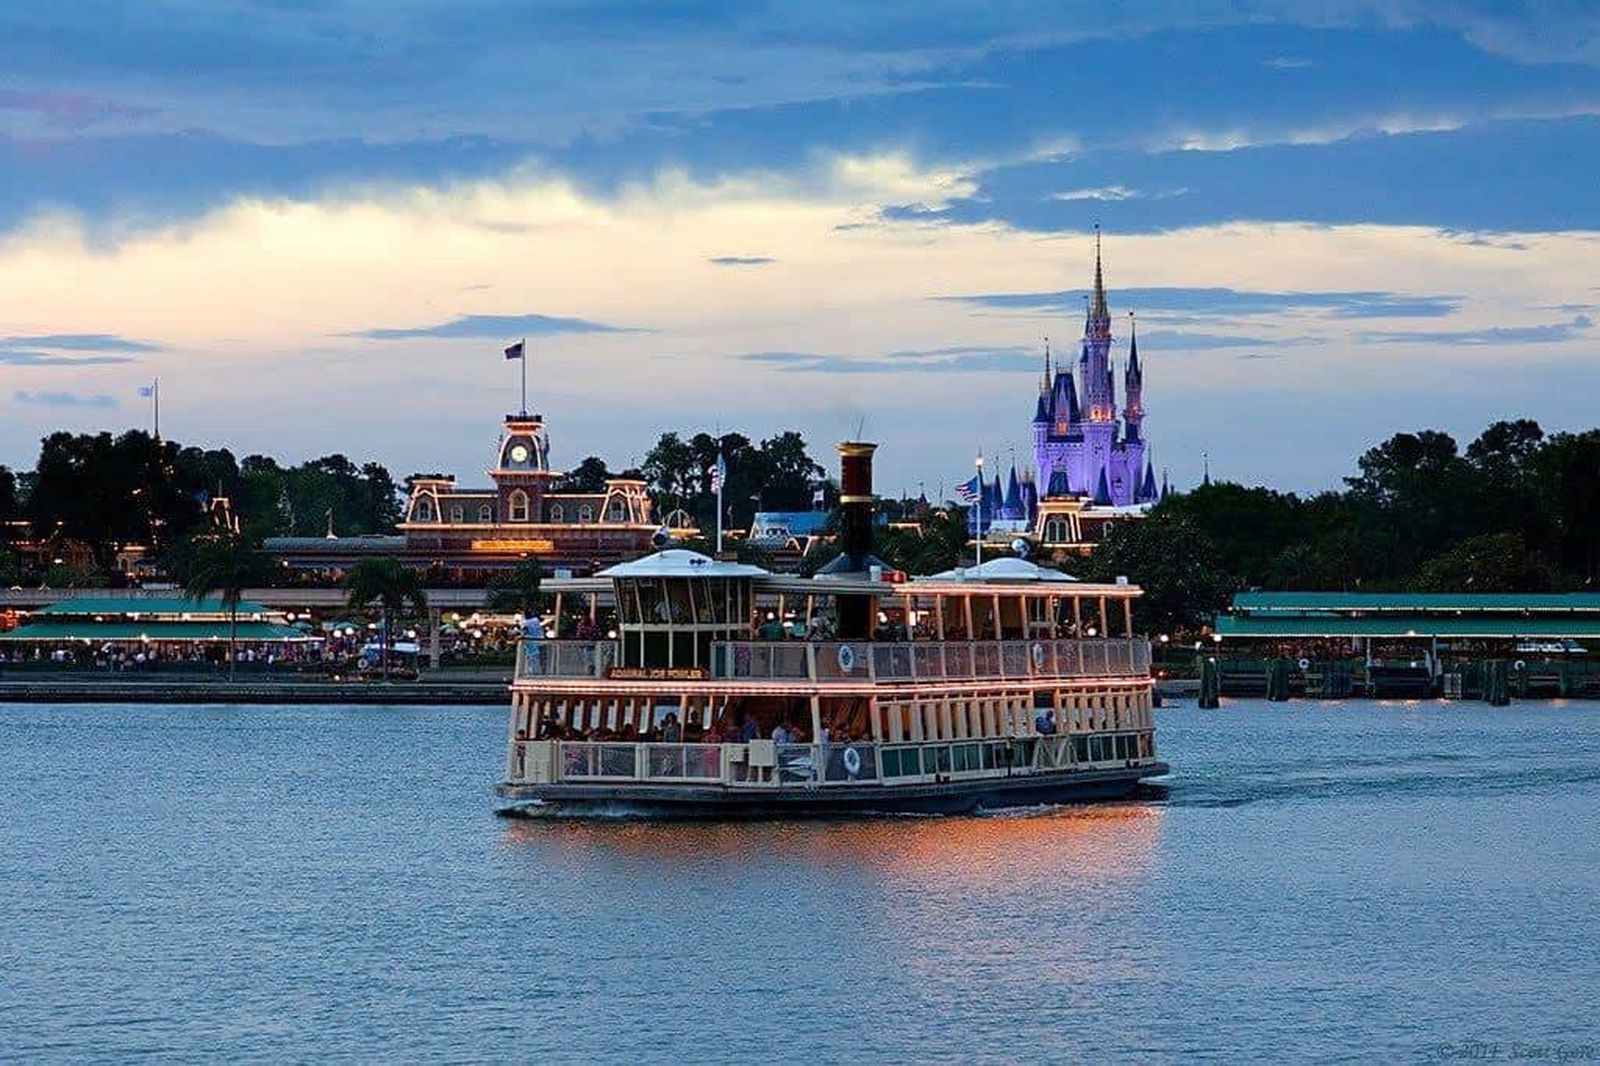 Disney Returns Fully Working Iphone 11 To Family Weeks After Device Sank To Bottom Of Seven Seas Lagoon